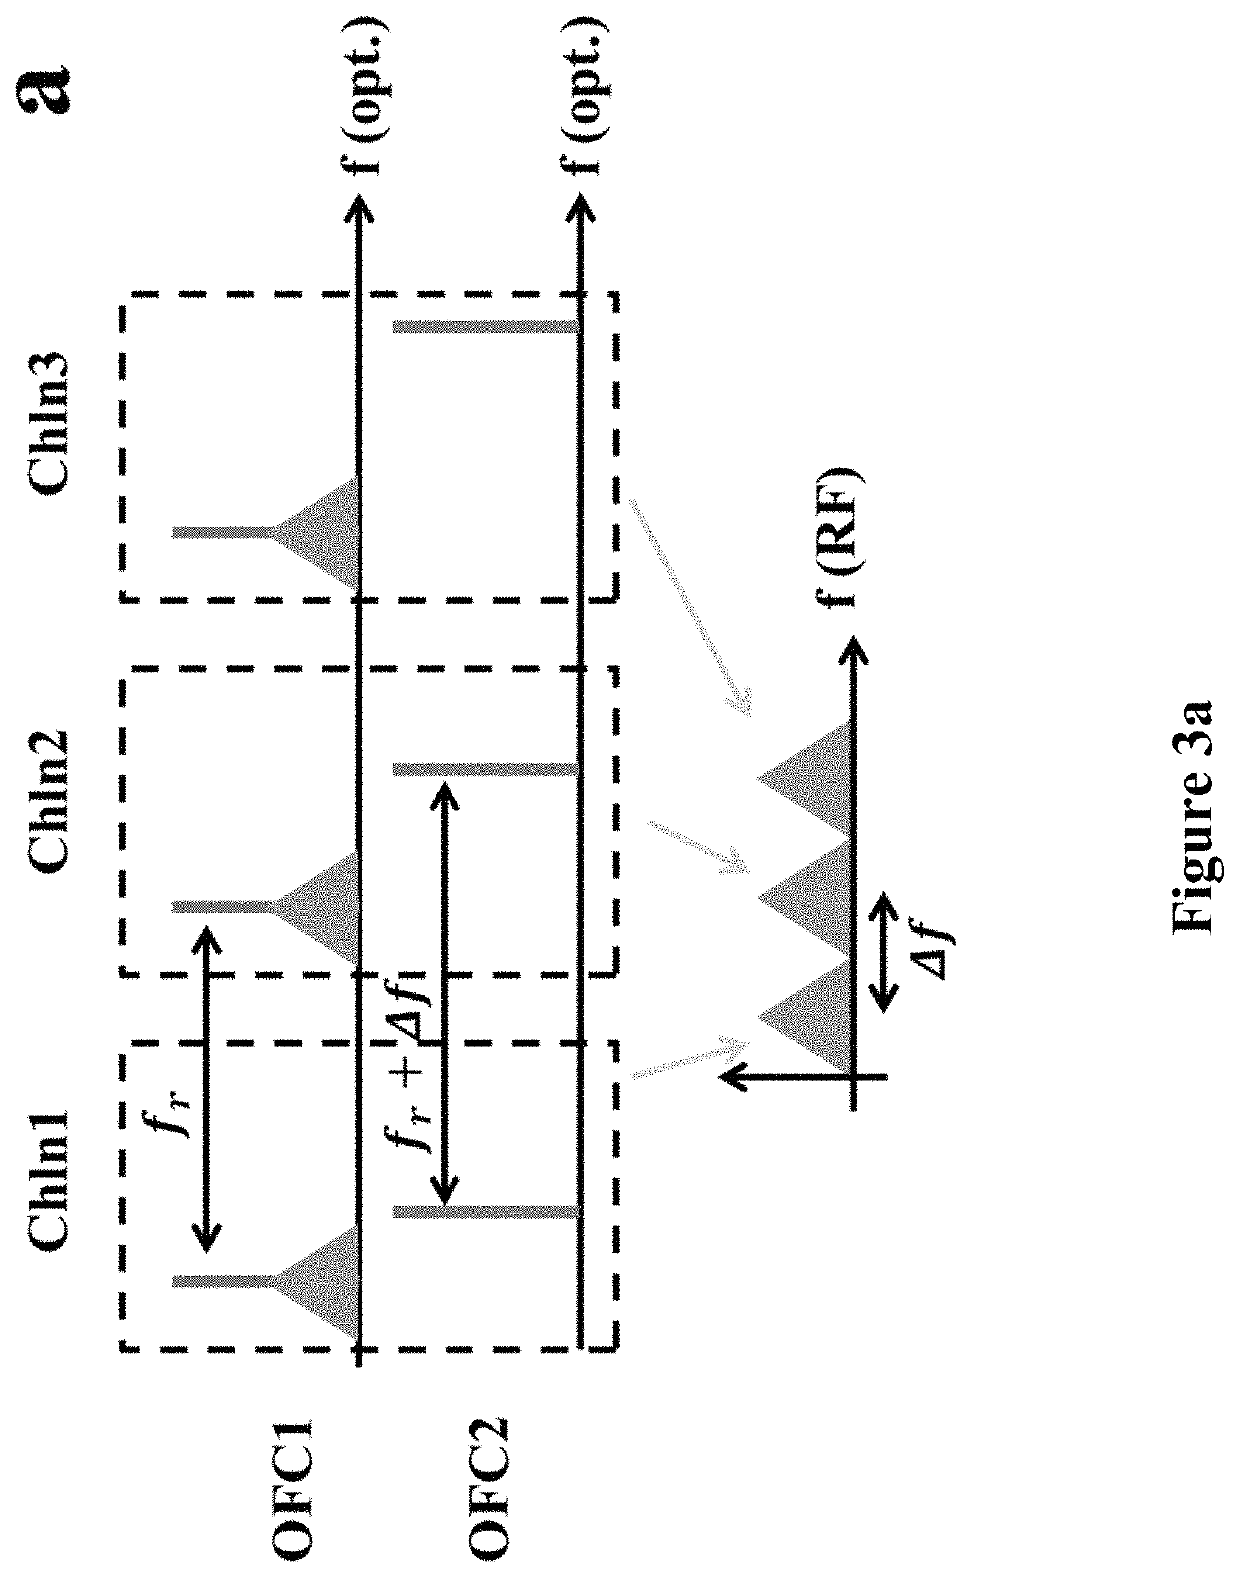 Integrated photonic microwave transceiver system